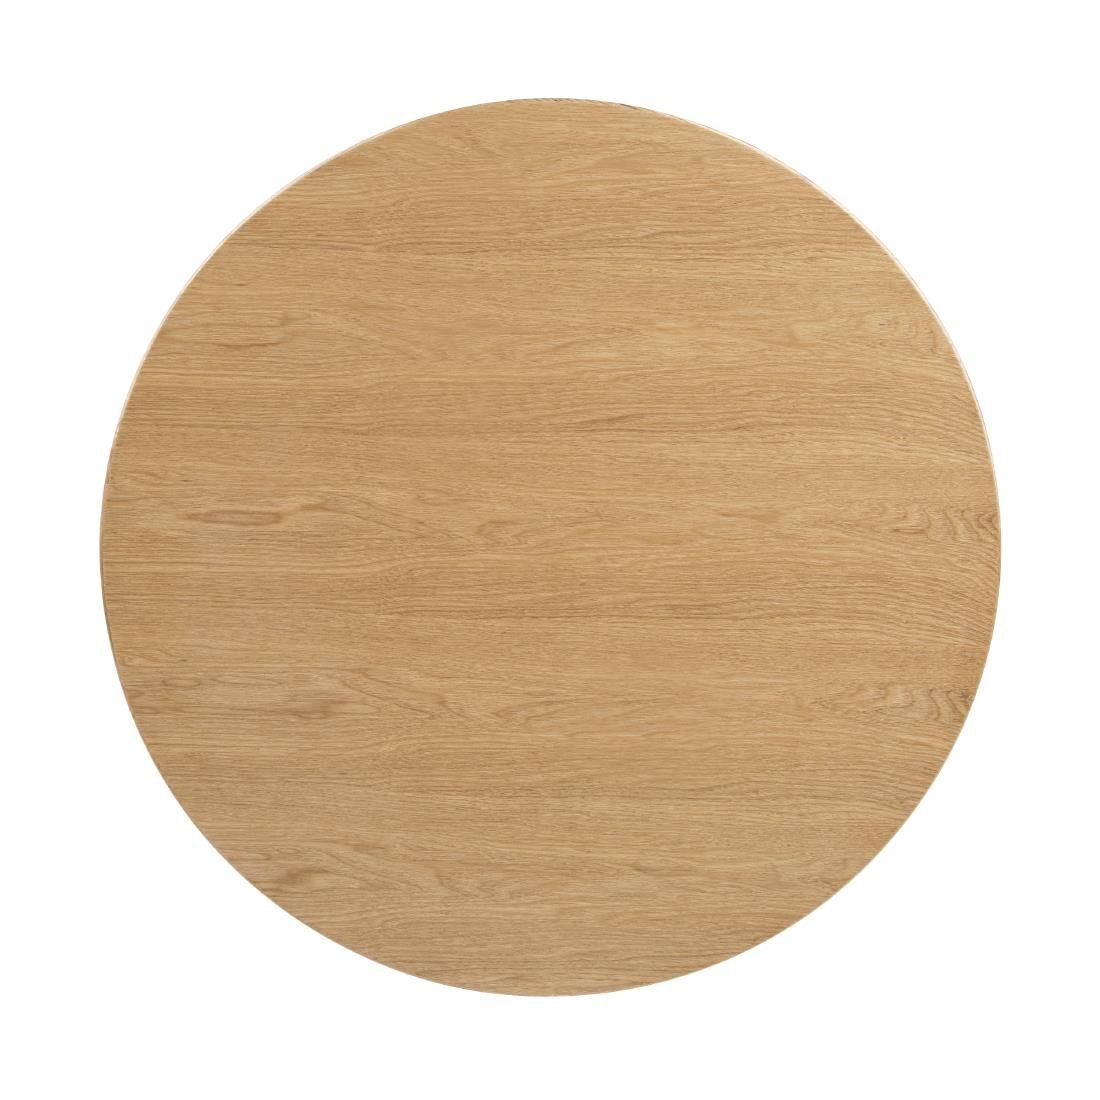 Bolero Pre-drilled Round Table Top Natural Ash Veneer 600mm JD Catering Equipment Solutions Ltd